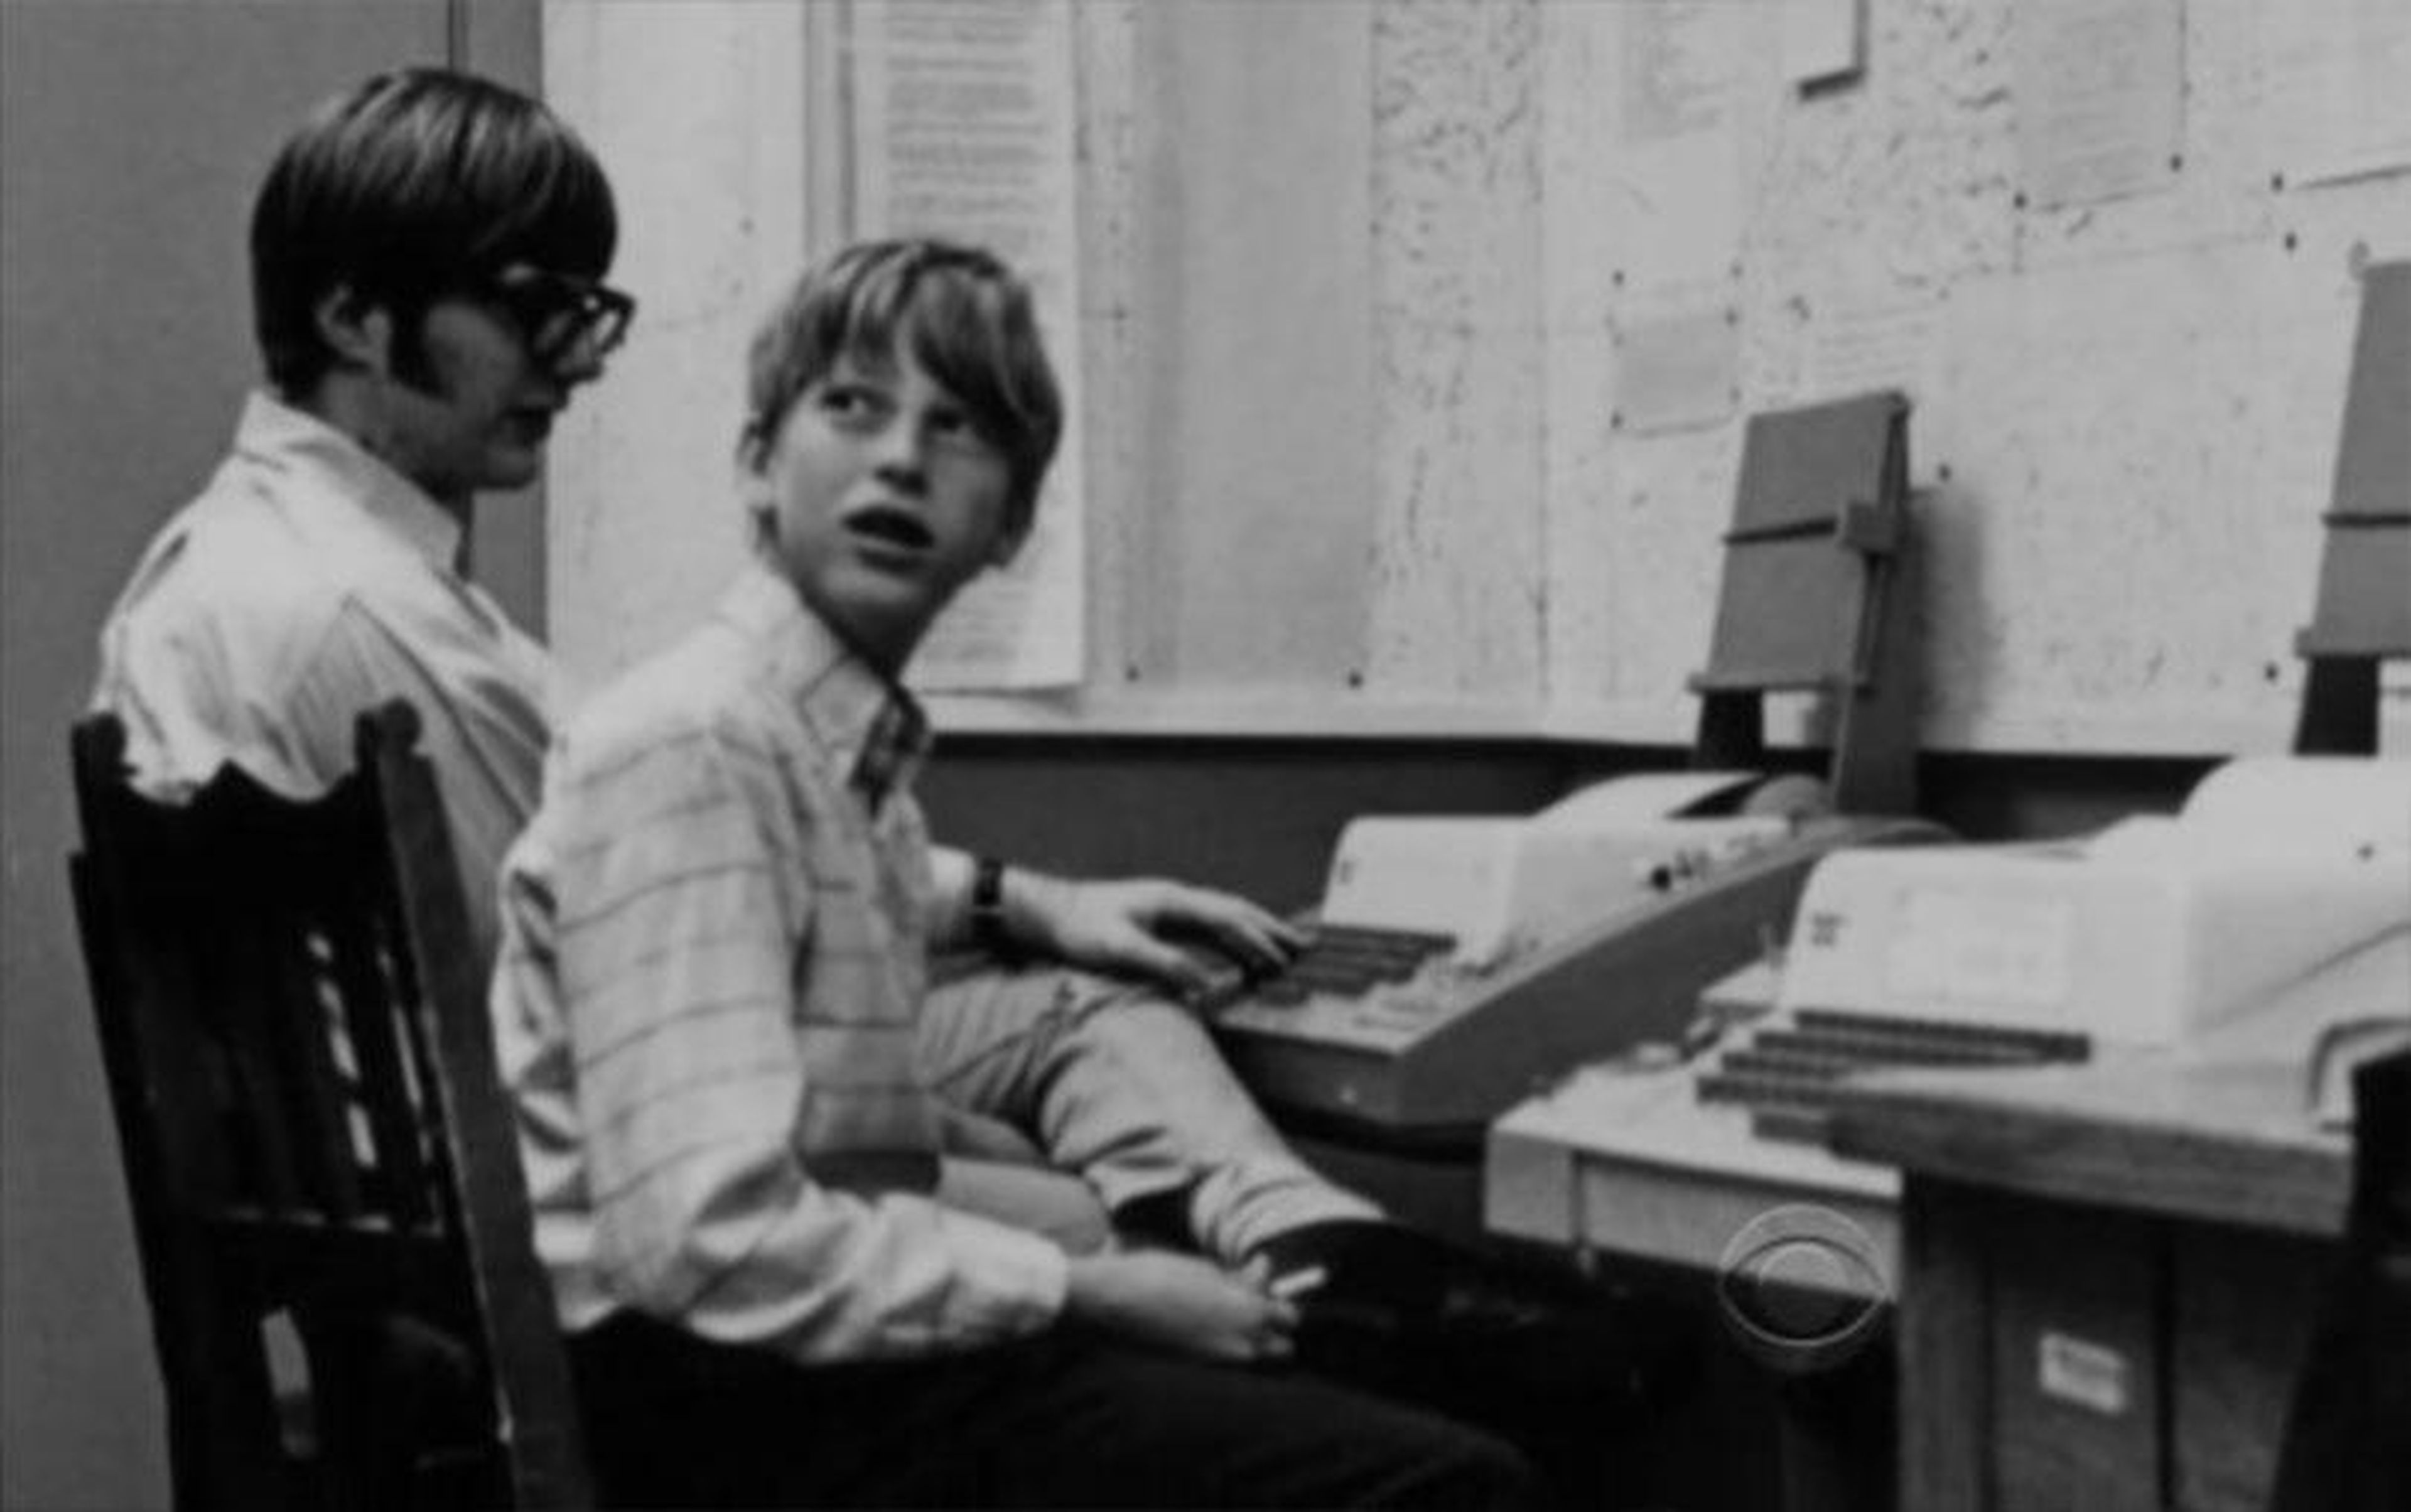 1. As a teen at Lakeside Prep School, Gates wrote his first computer program on a General Electric computer. It was a version of tic-tac-toe where you could play against the machine.